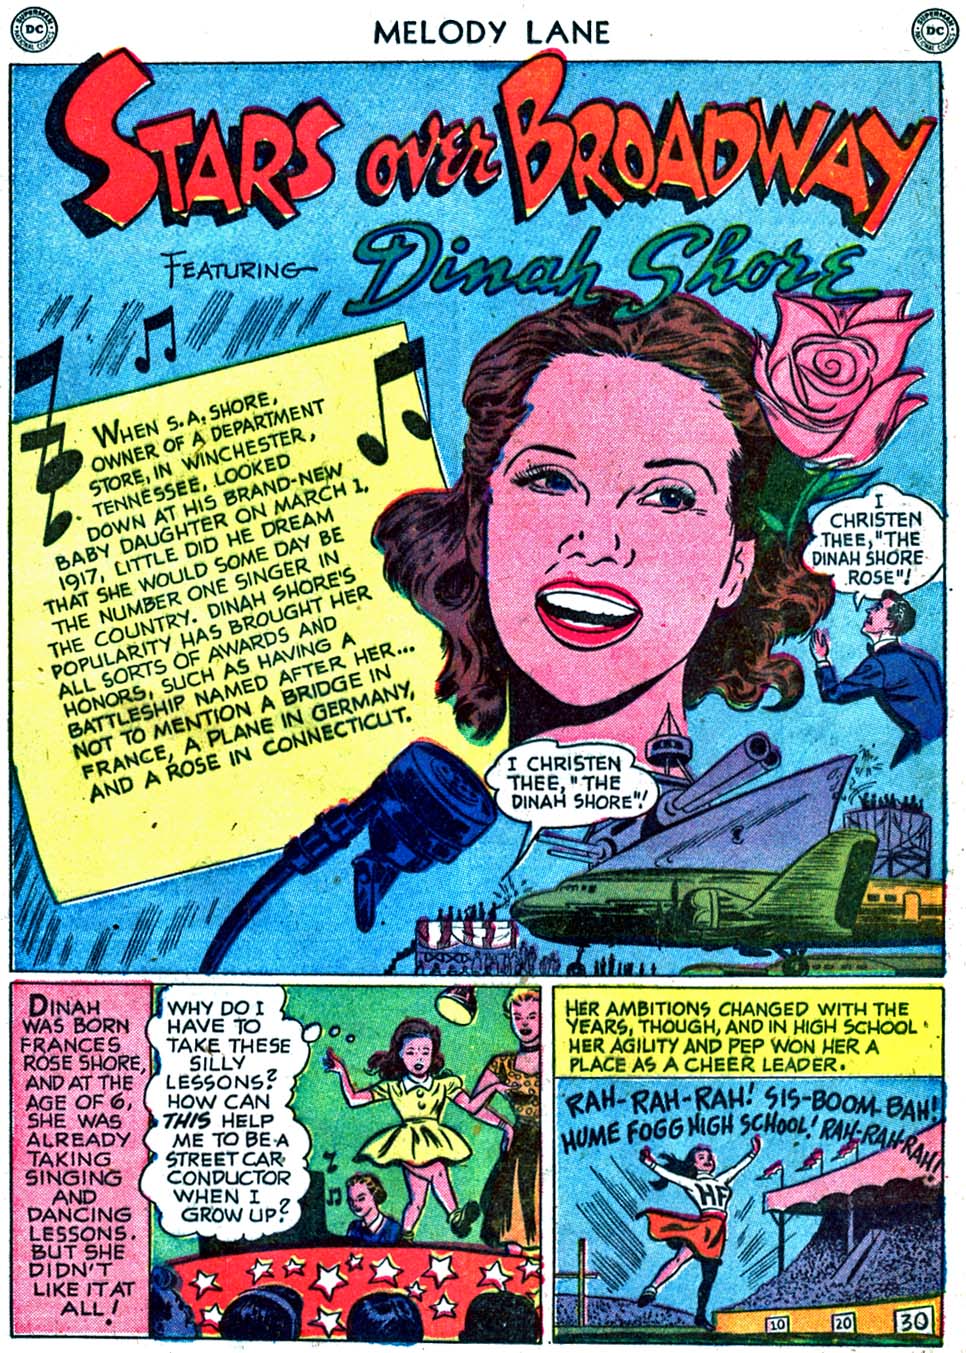 Read online Miss Melody Lane of Broadway comic -  Issue #2 - 23